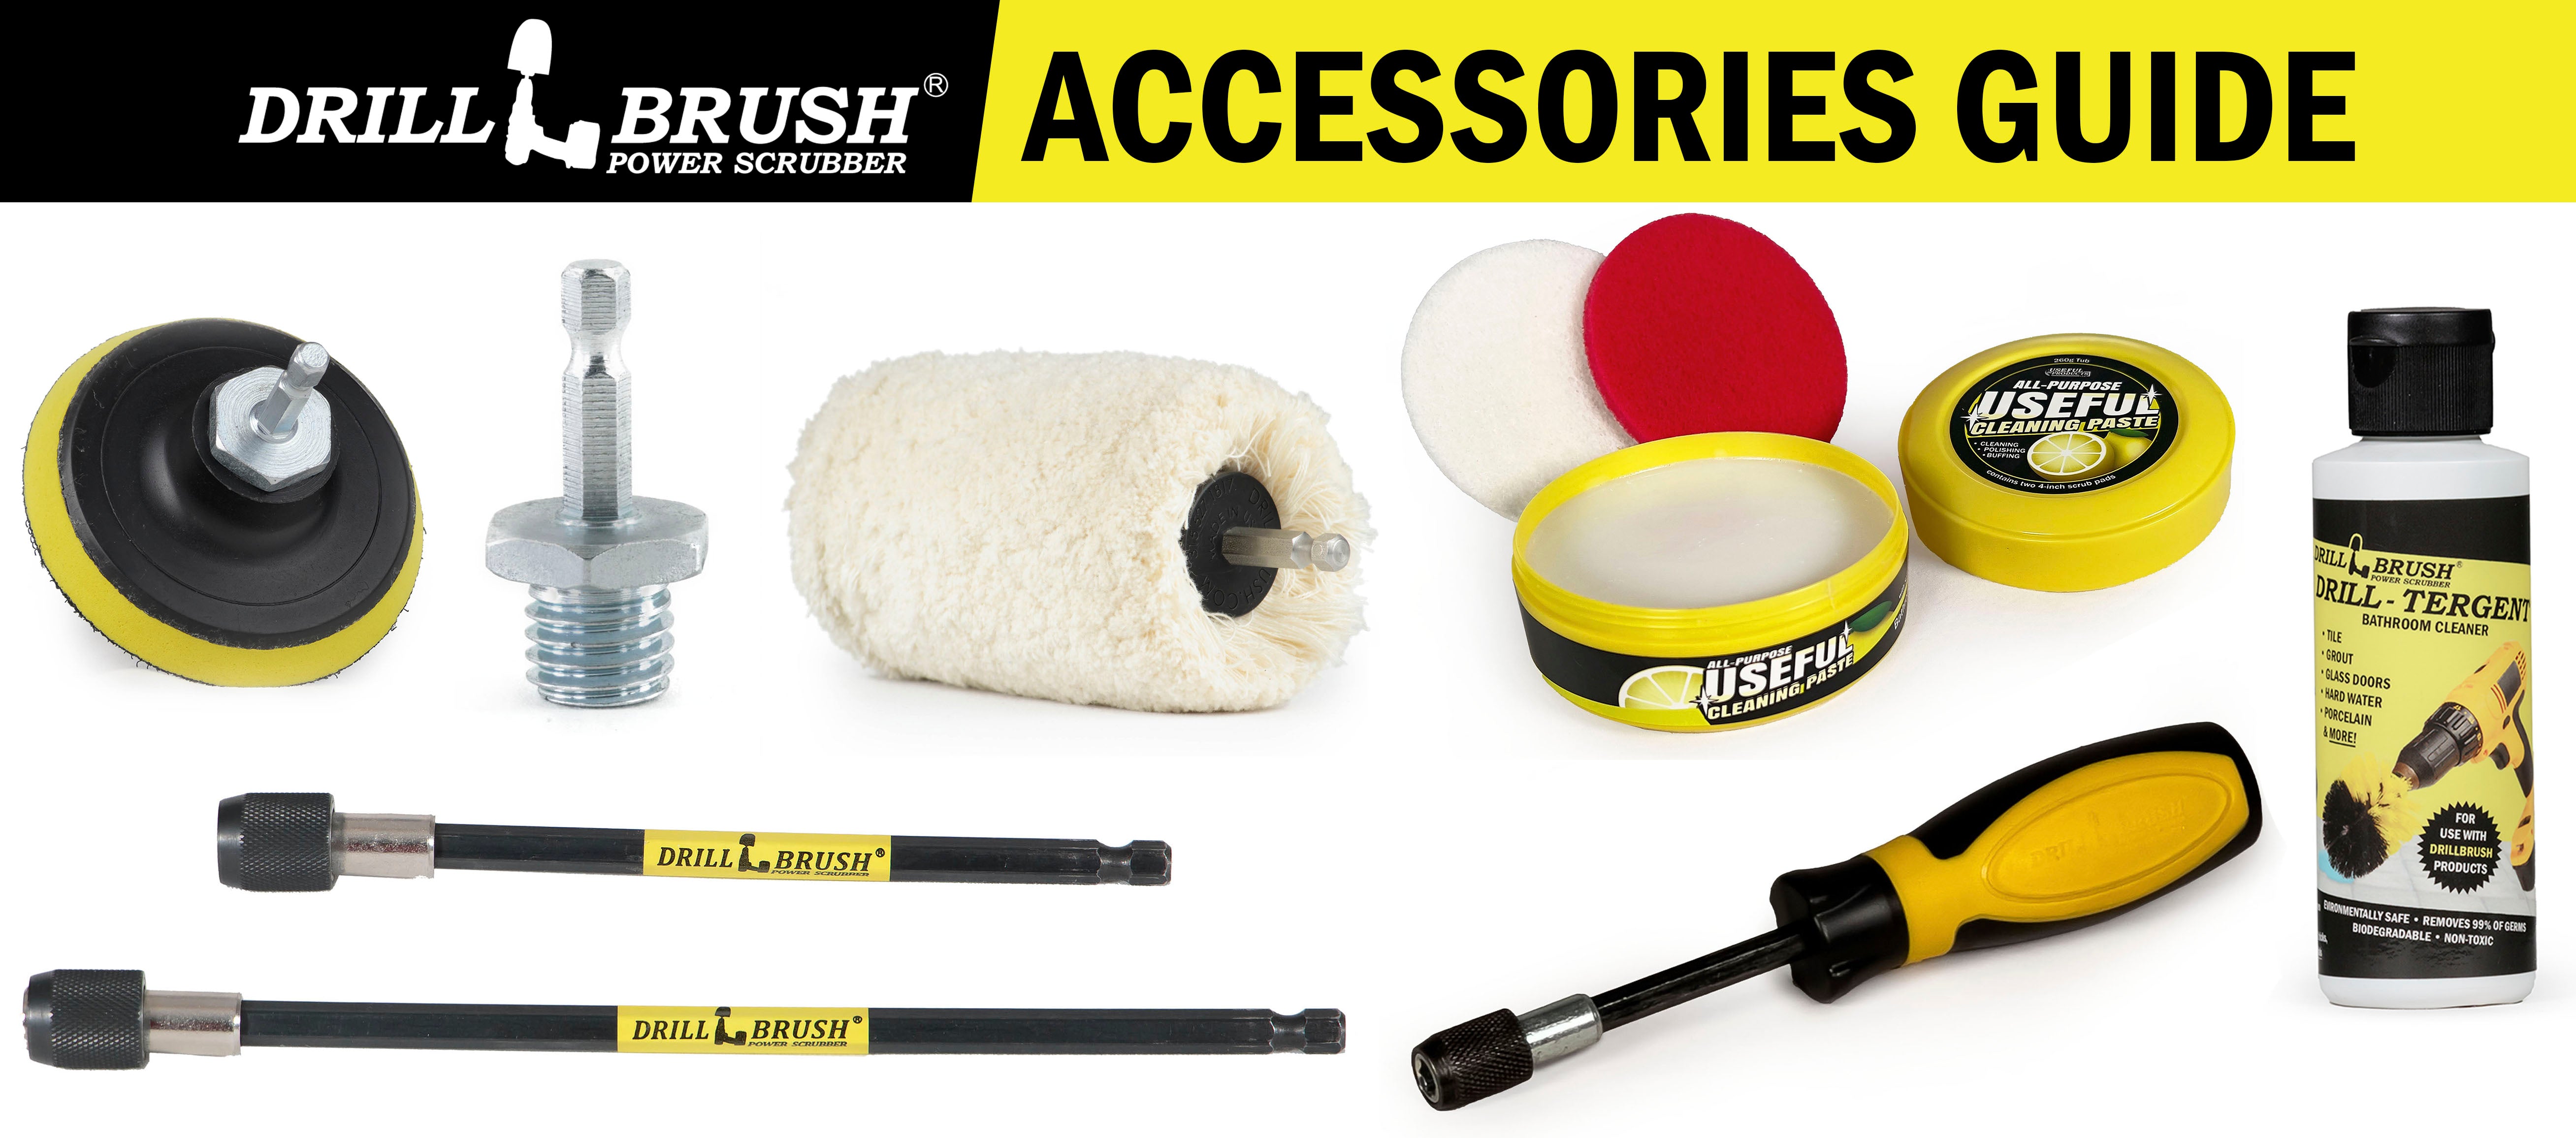 What Accessories Can I Use with a Drillbrush? A Guide to Drillbrush Accessories